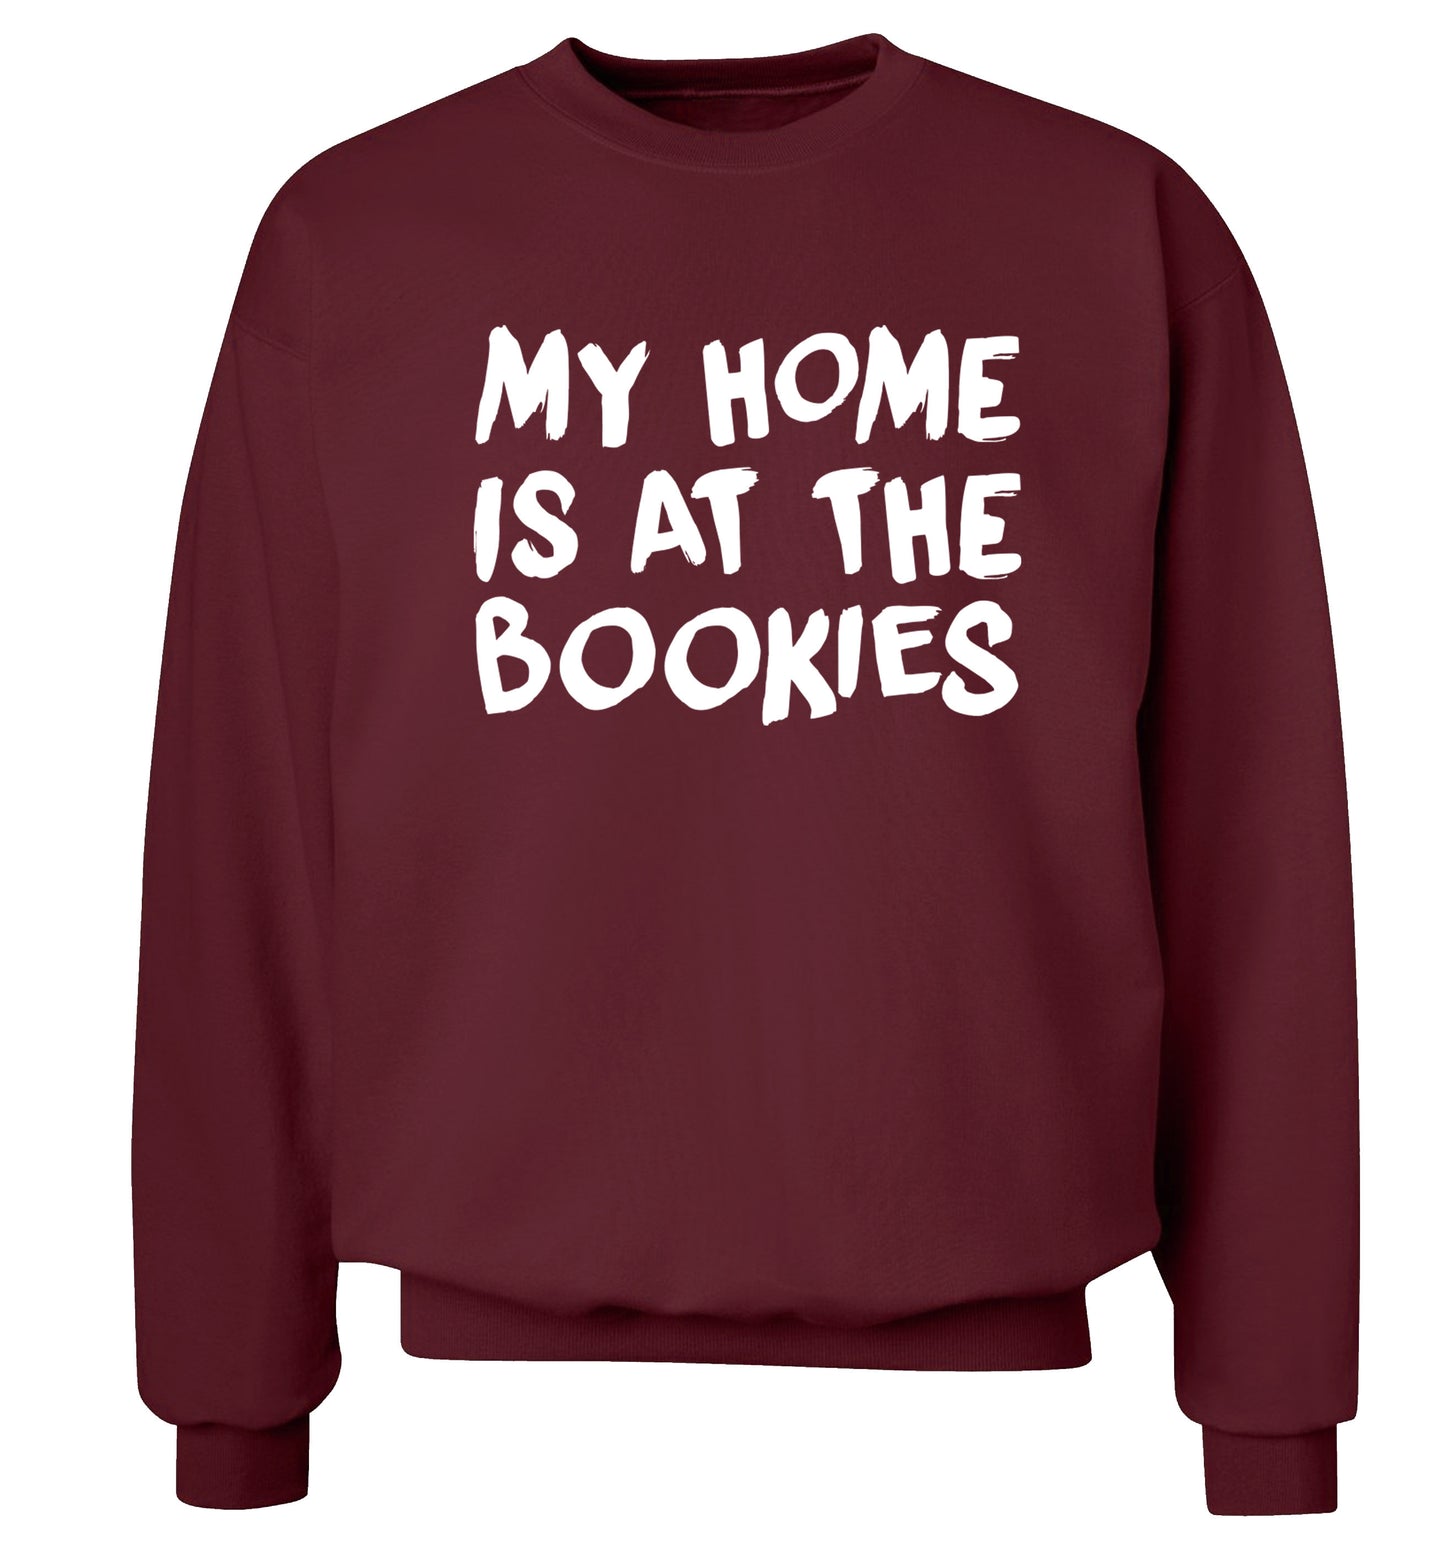 My home is at the bookies Adult's unisex maroon Sweater 2XL